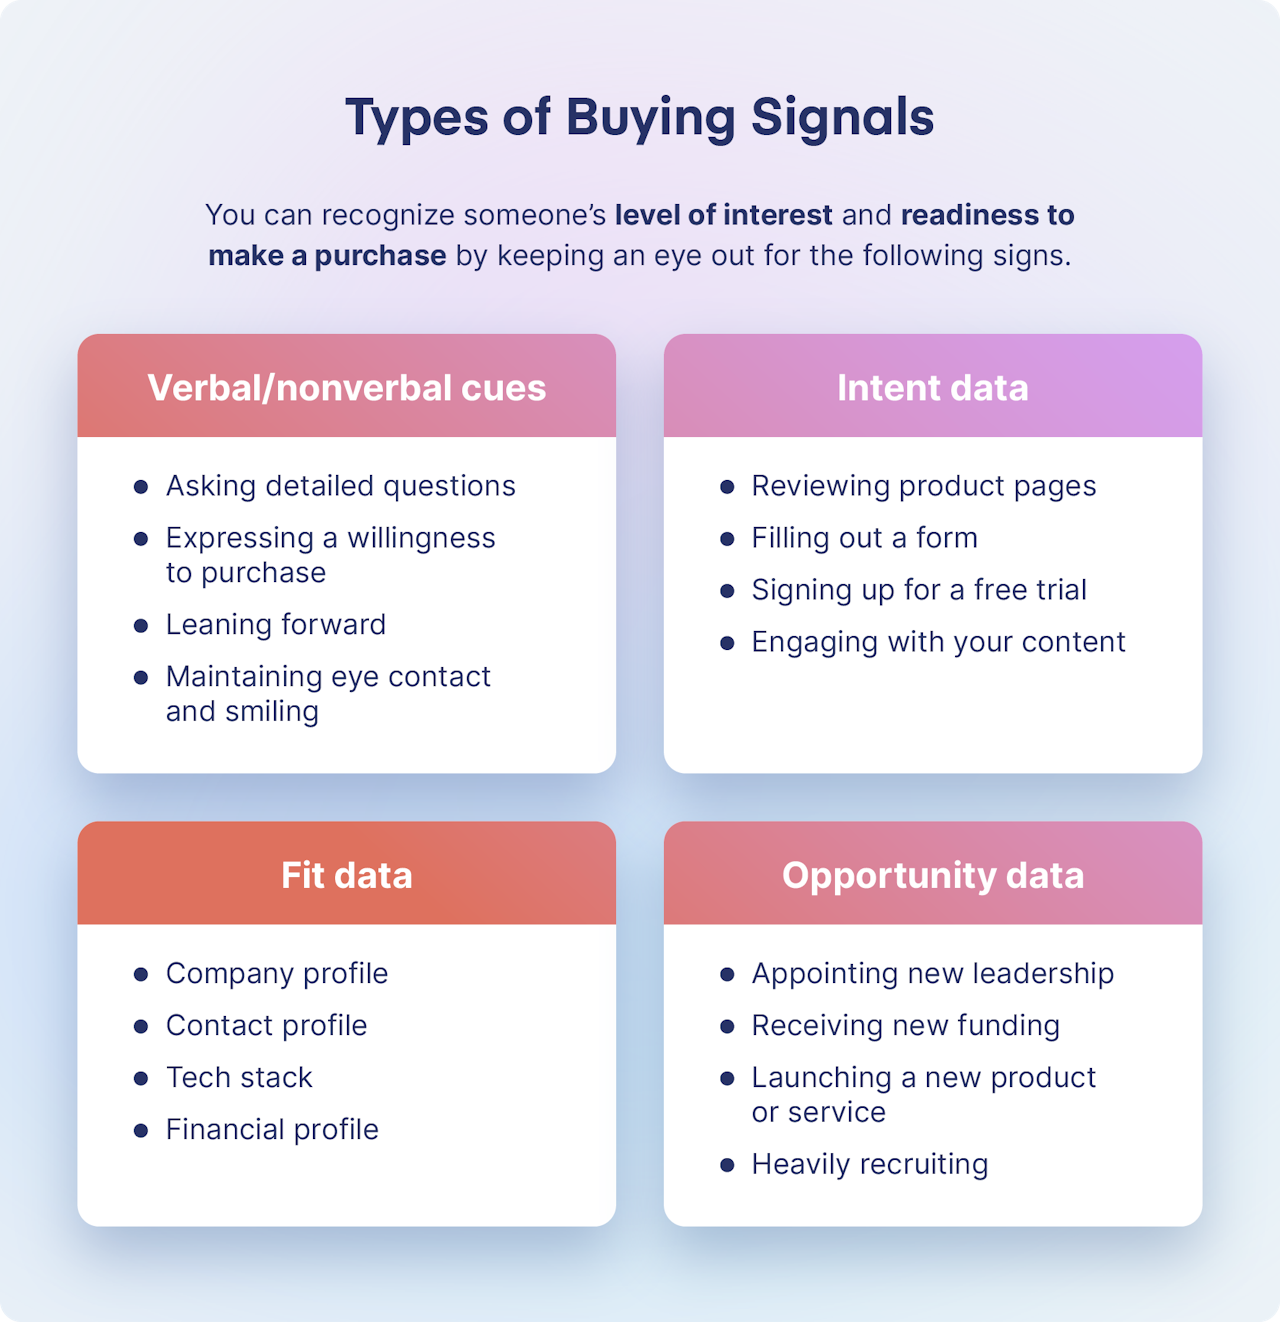 Sales intelligence: types of buying signals